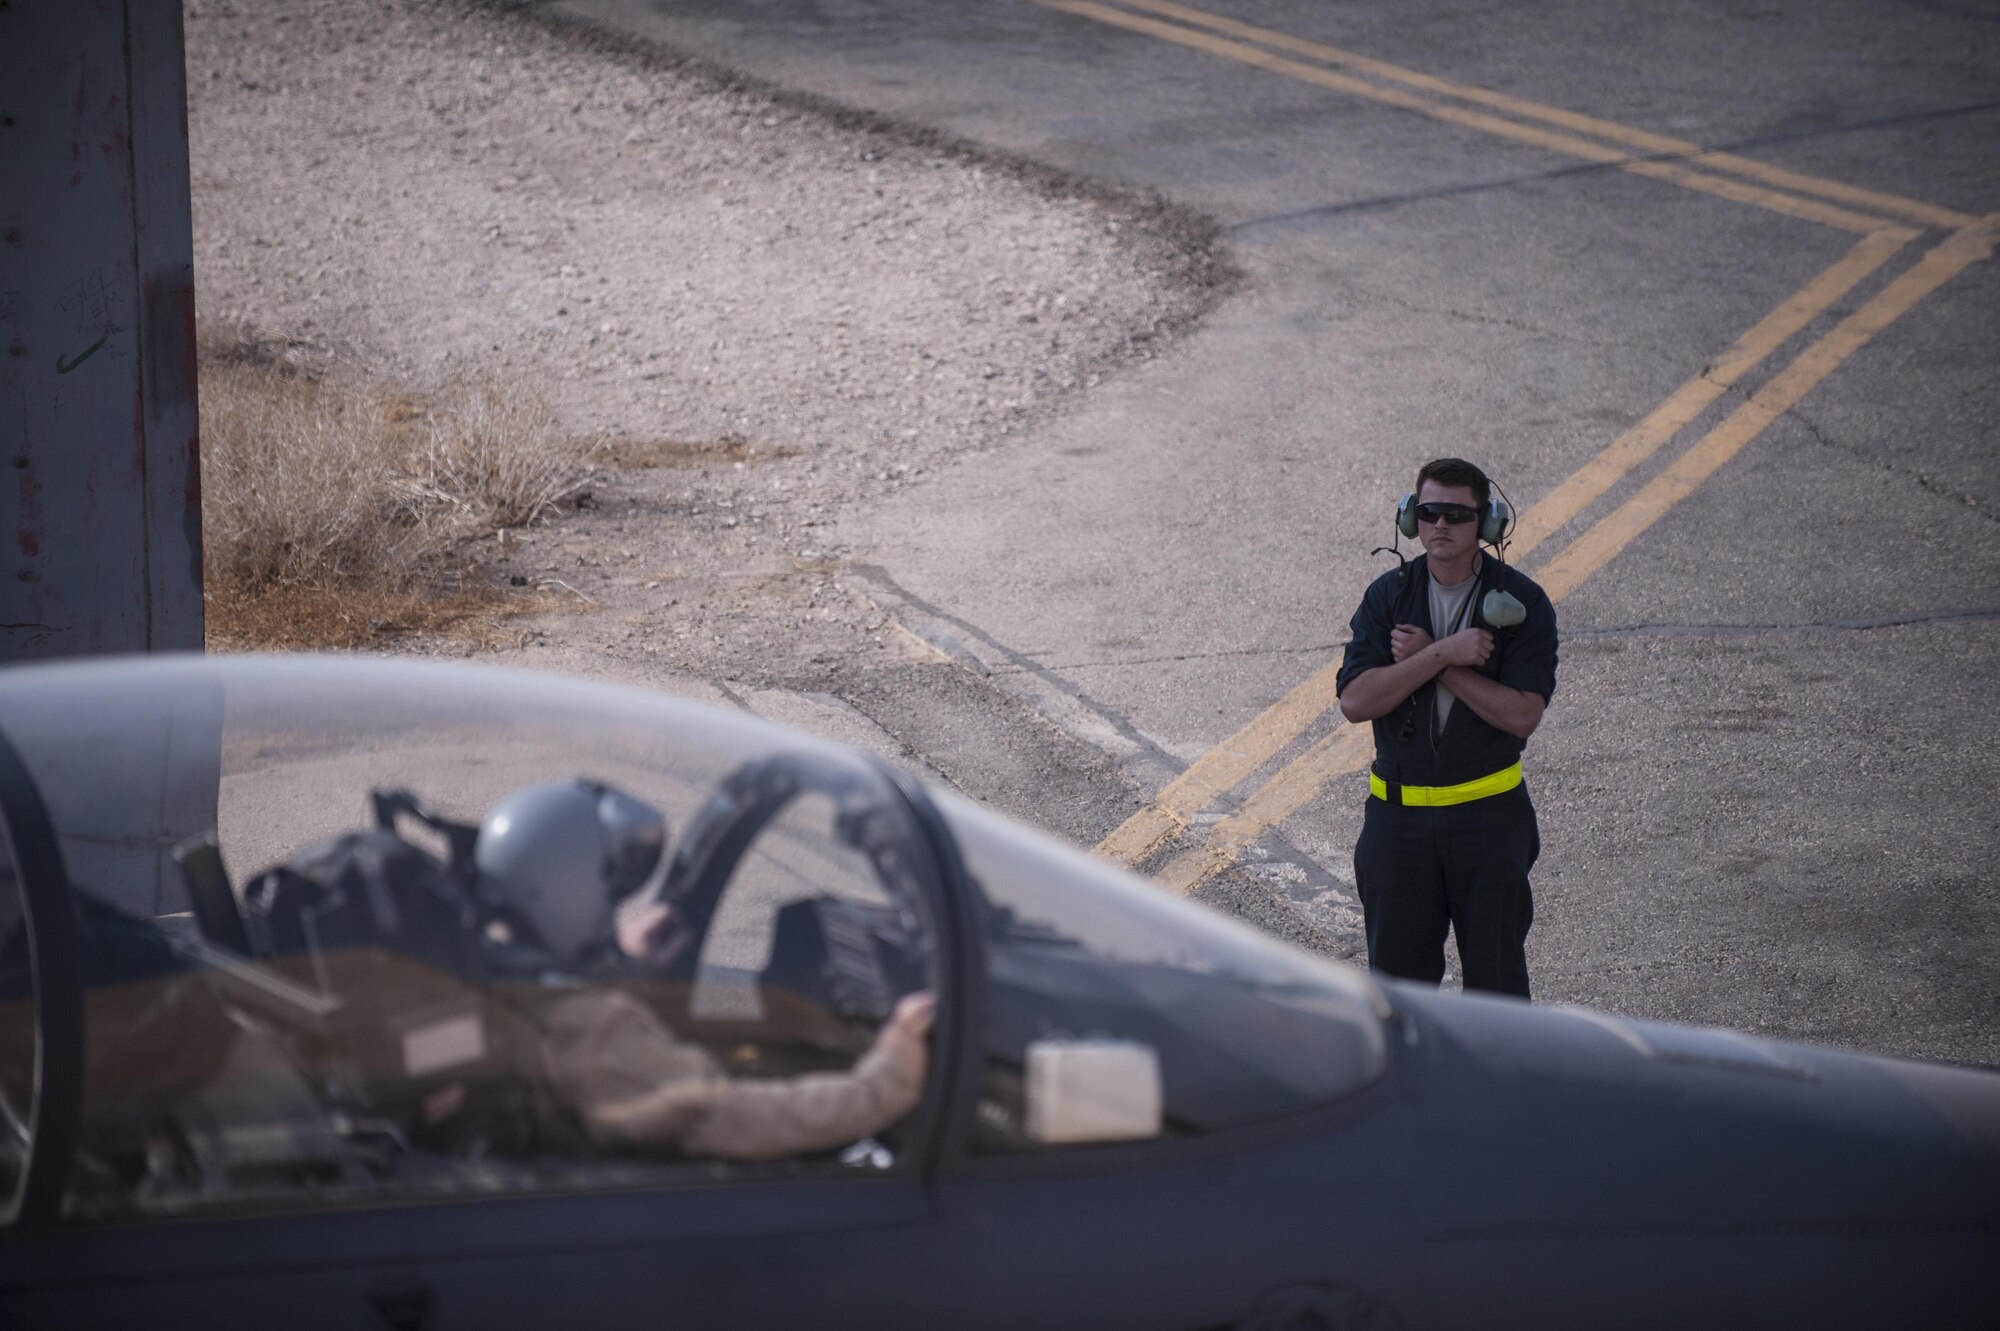 A crew chief assigned to the 332nd Expeditionary Maintenance Squadron motions for pilots to hold their position prior to takeoff October 9, 2017 in Southwest Asia. During their time in the region, maintenance Airmen set a perfect record of zero combat sorties missed.